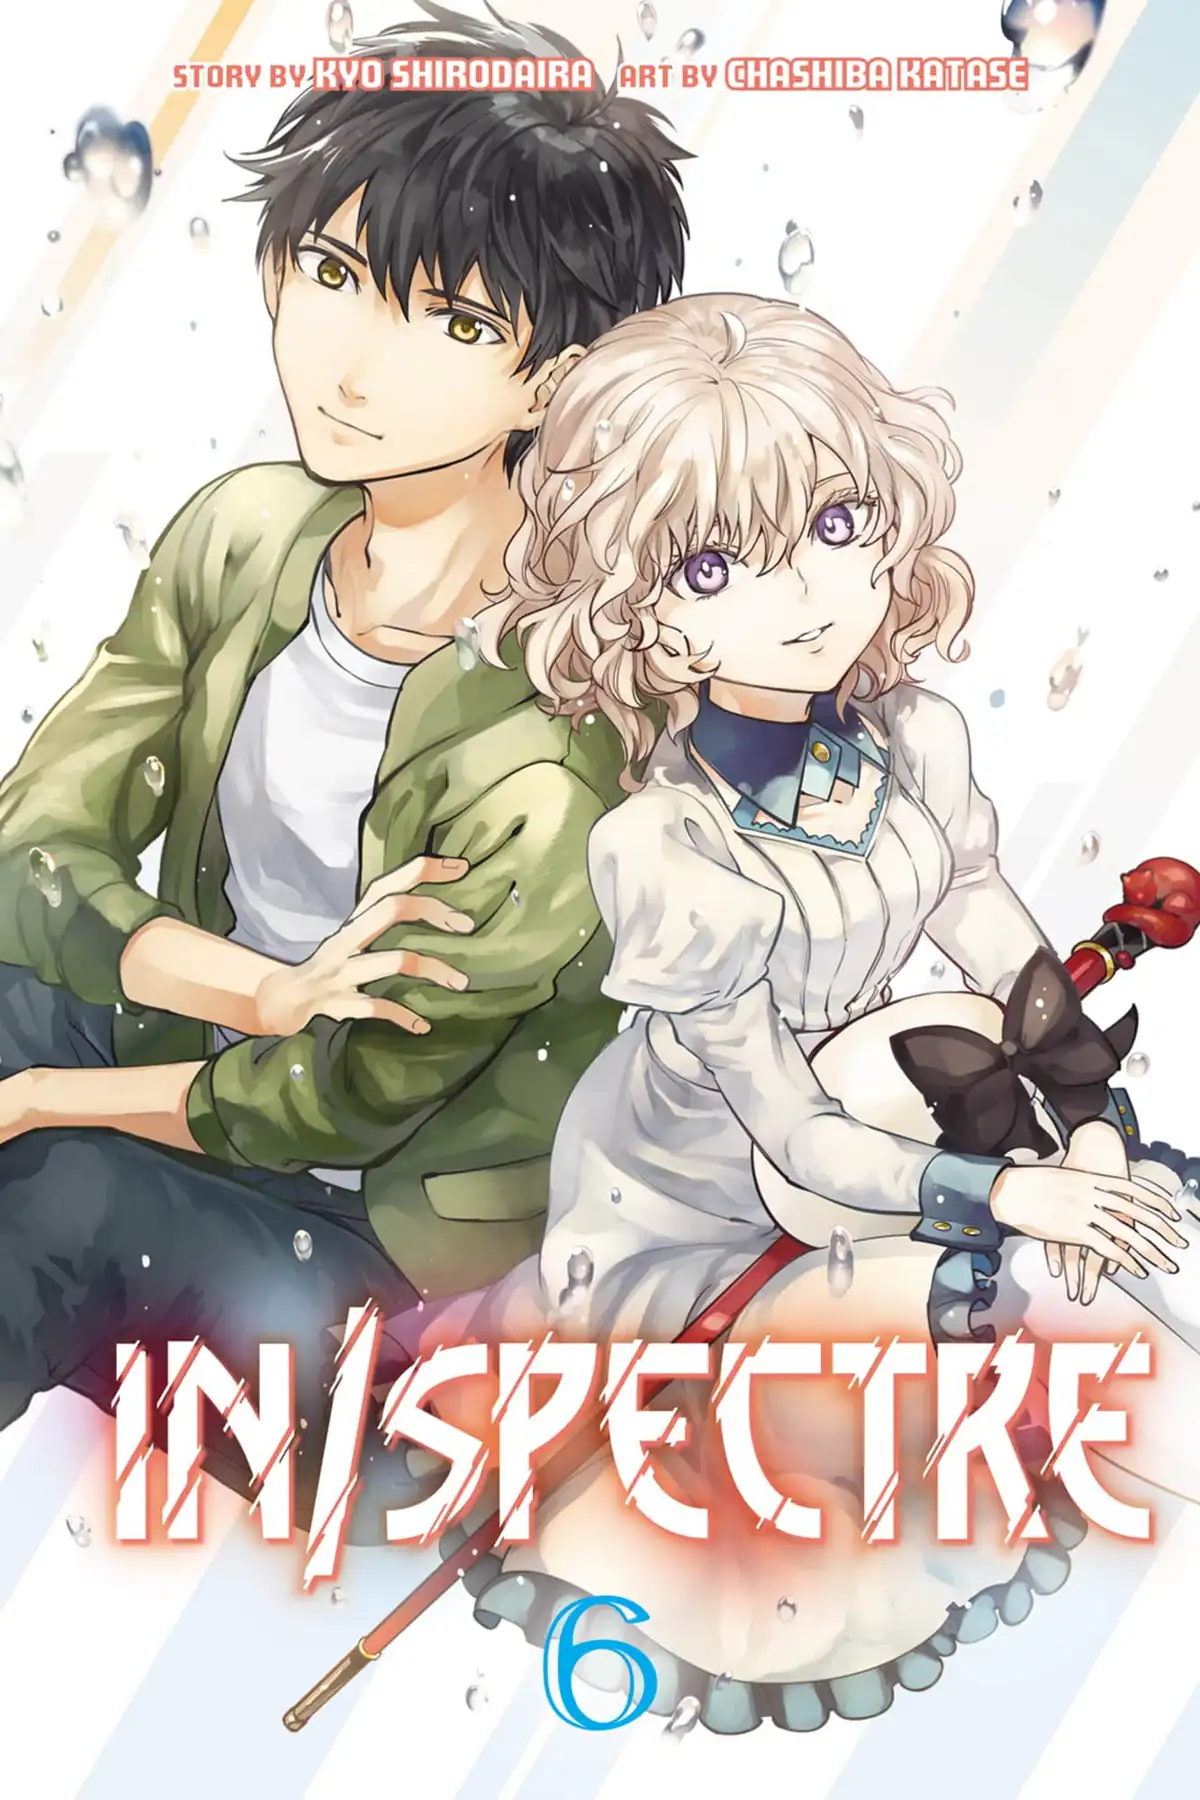 In/Spectre – Empath Meets Anime